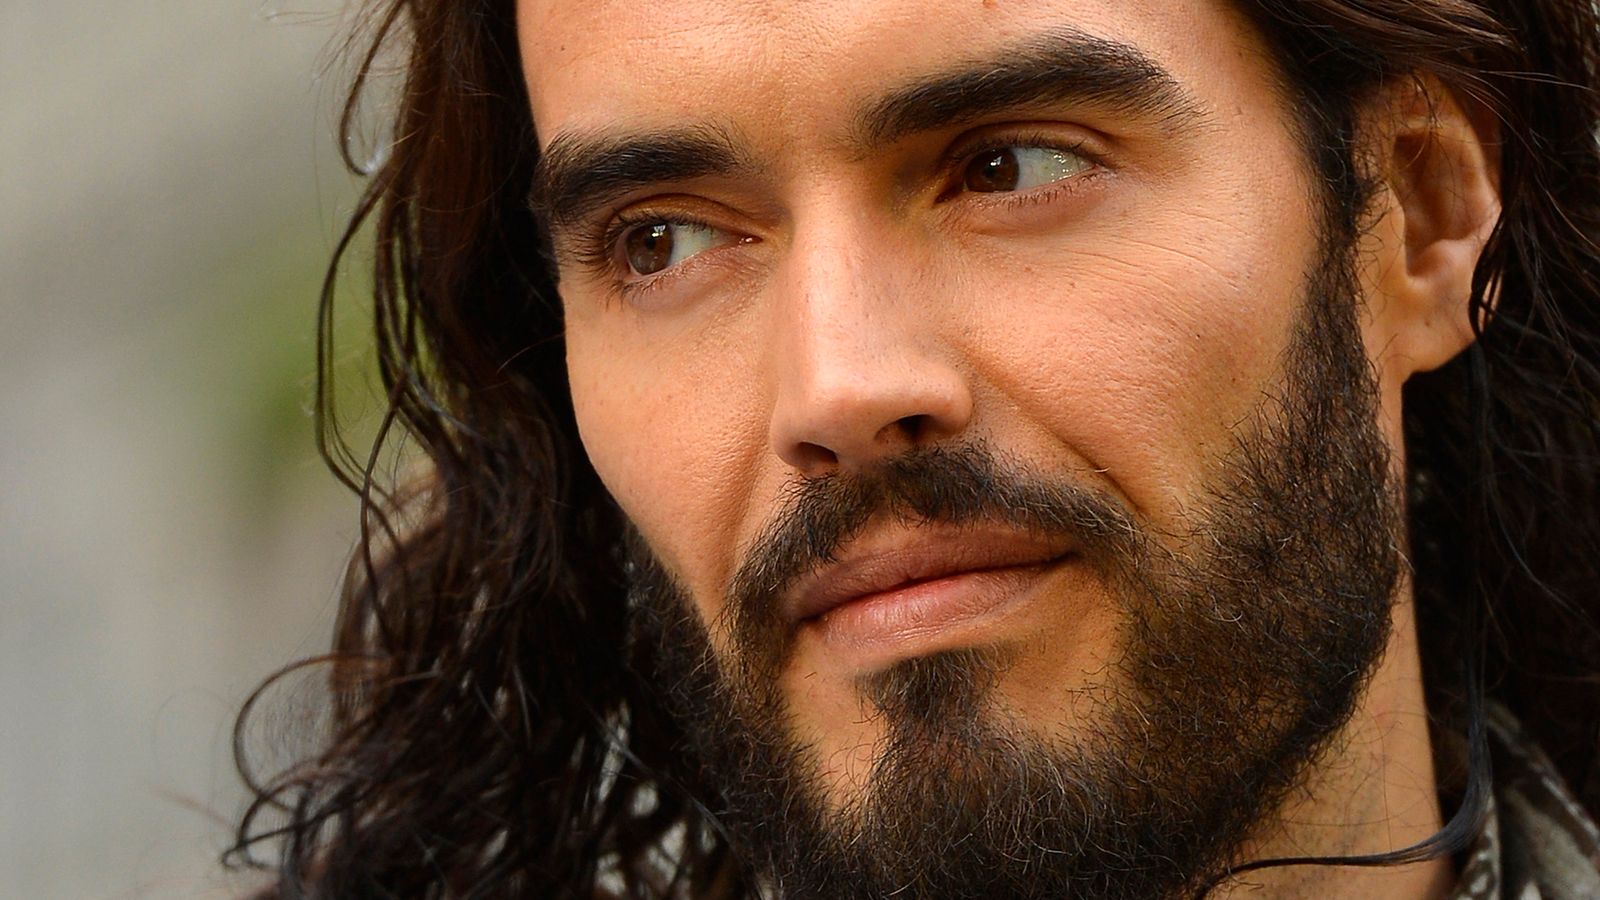 Russell Brand: YouTube suspends adverts on comedian's videos after sexual assault allegations